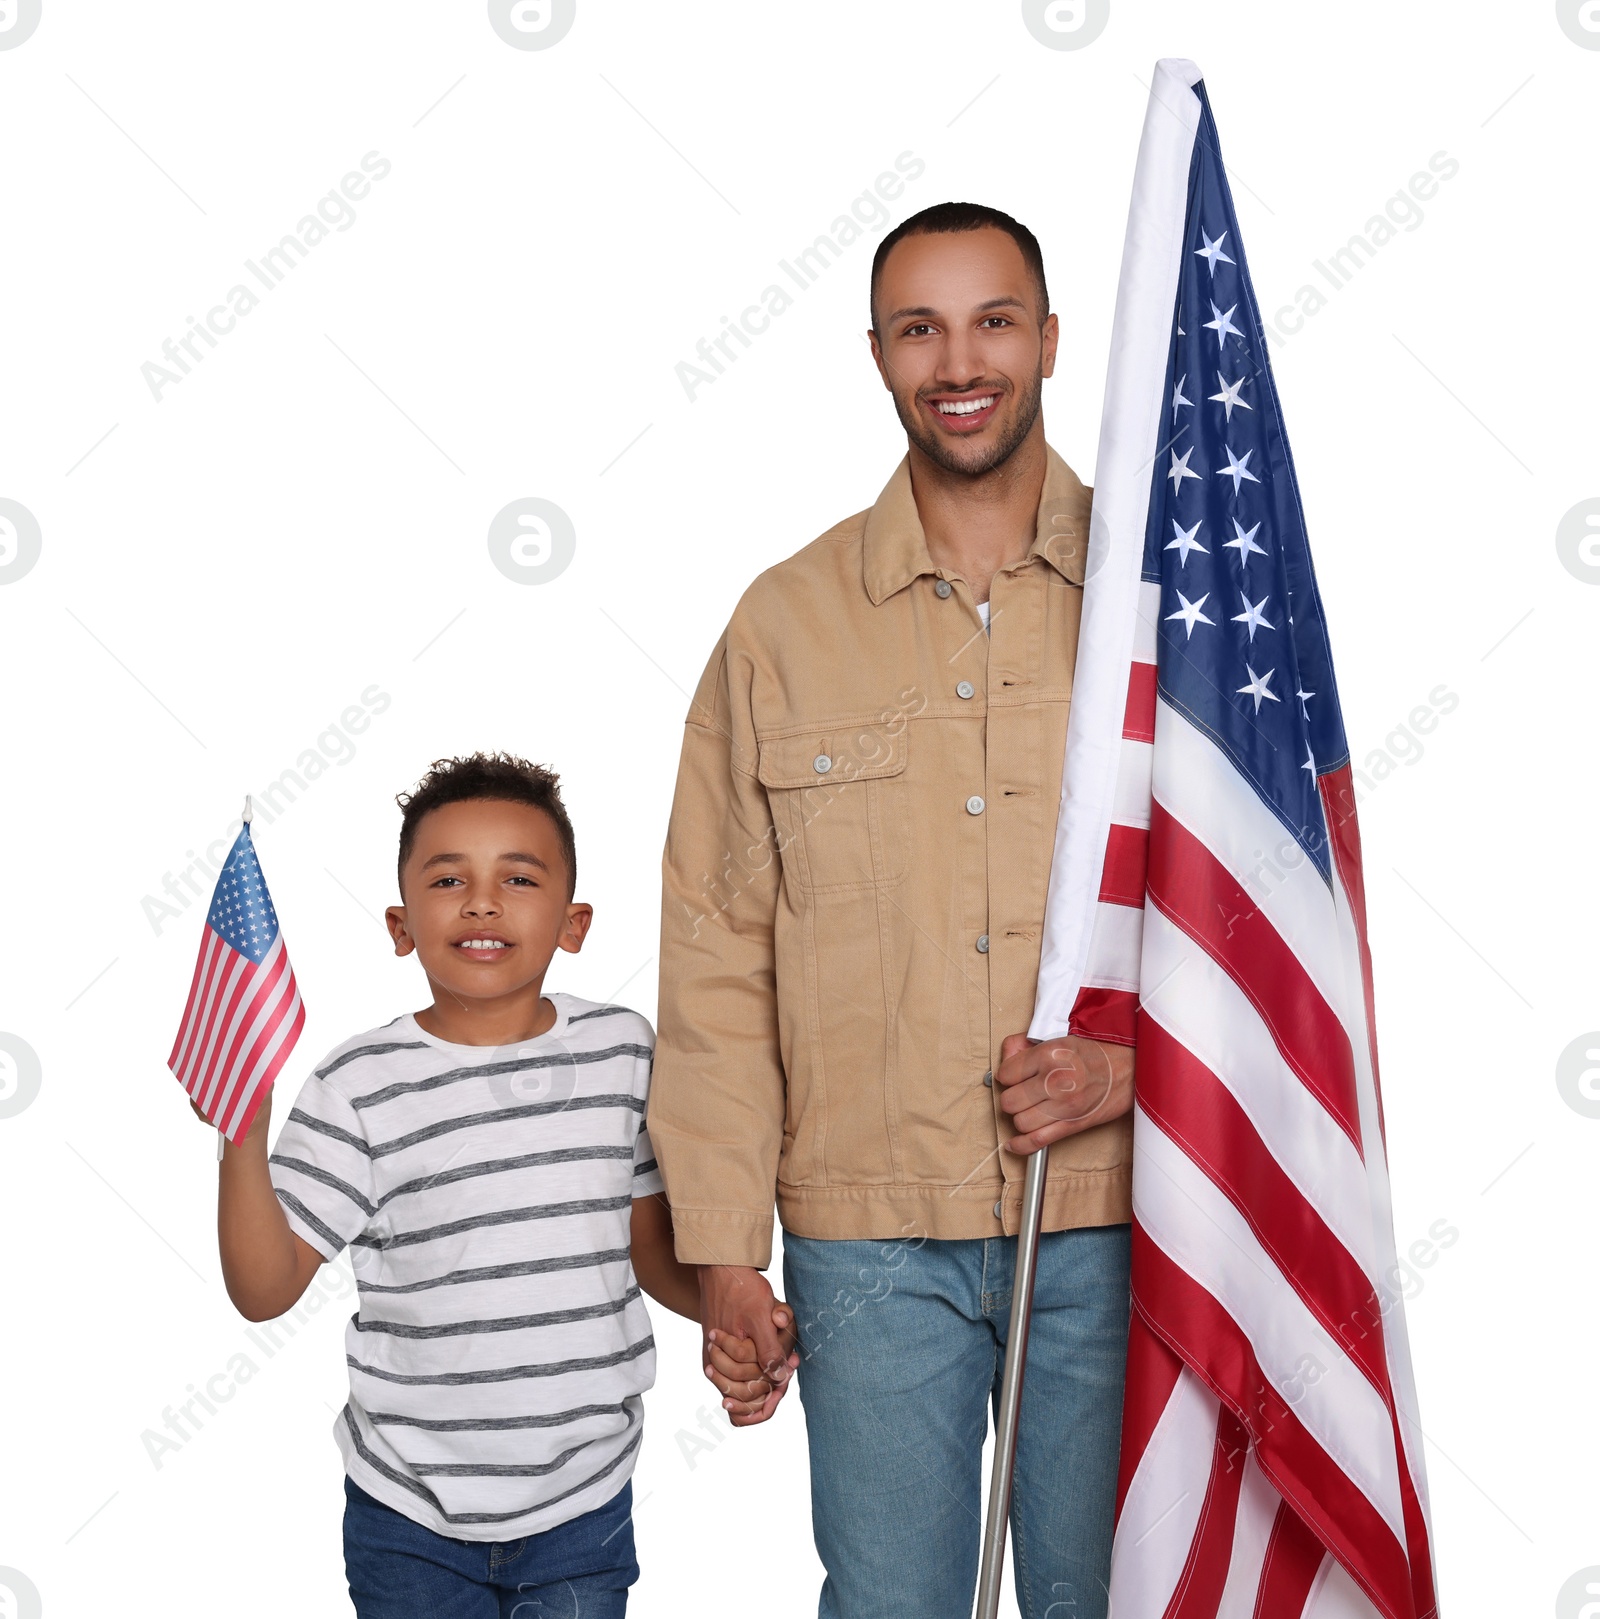 Image of 4th of July - Independence day of America. Happy man and his son with national flags of United States on white background